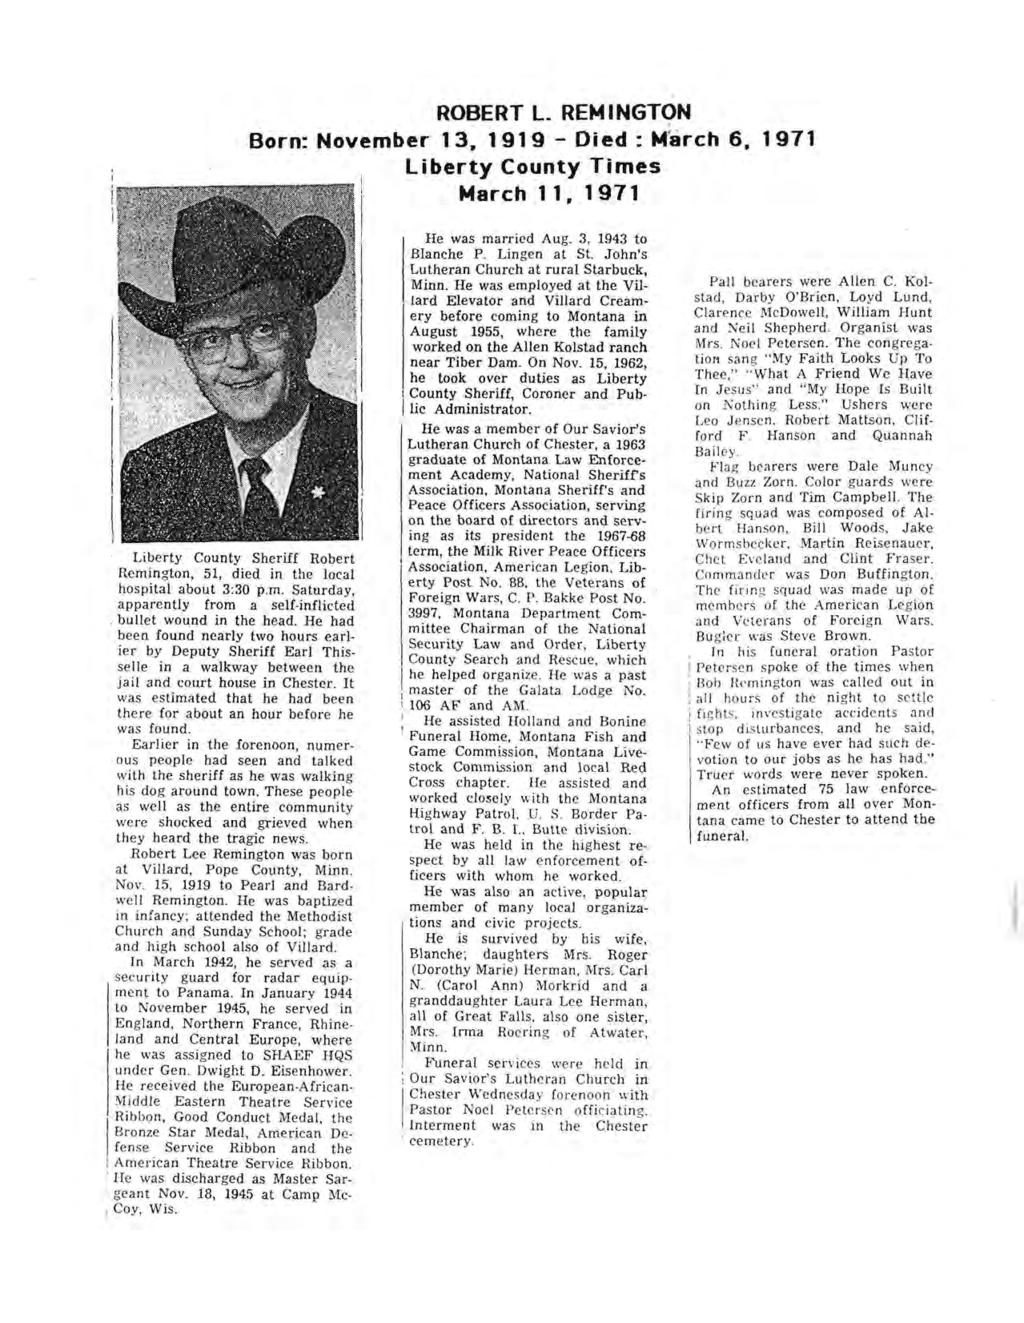 ROBERT L REM I NGT<;lN Born: November 13. 1919 - Died: Mfarch 6. 1911 liberty County Times March 11. 1911 Liberty County Sheriff Robert Remington, 51, died in the local hospital about 3:30 p.m. Saturday, apparently from a self-inflicted bullet wound in the head.